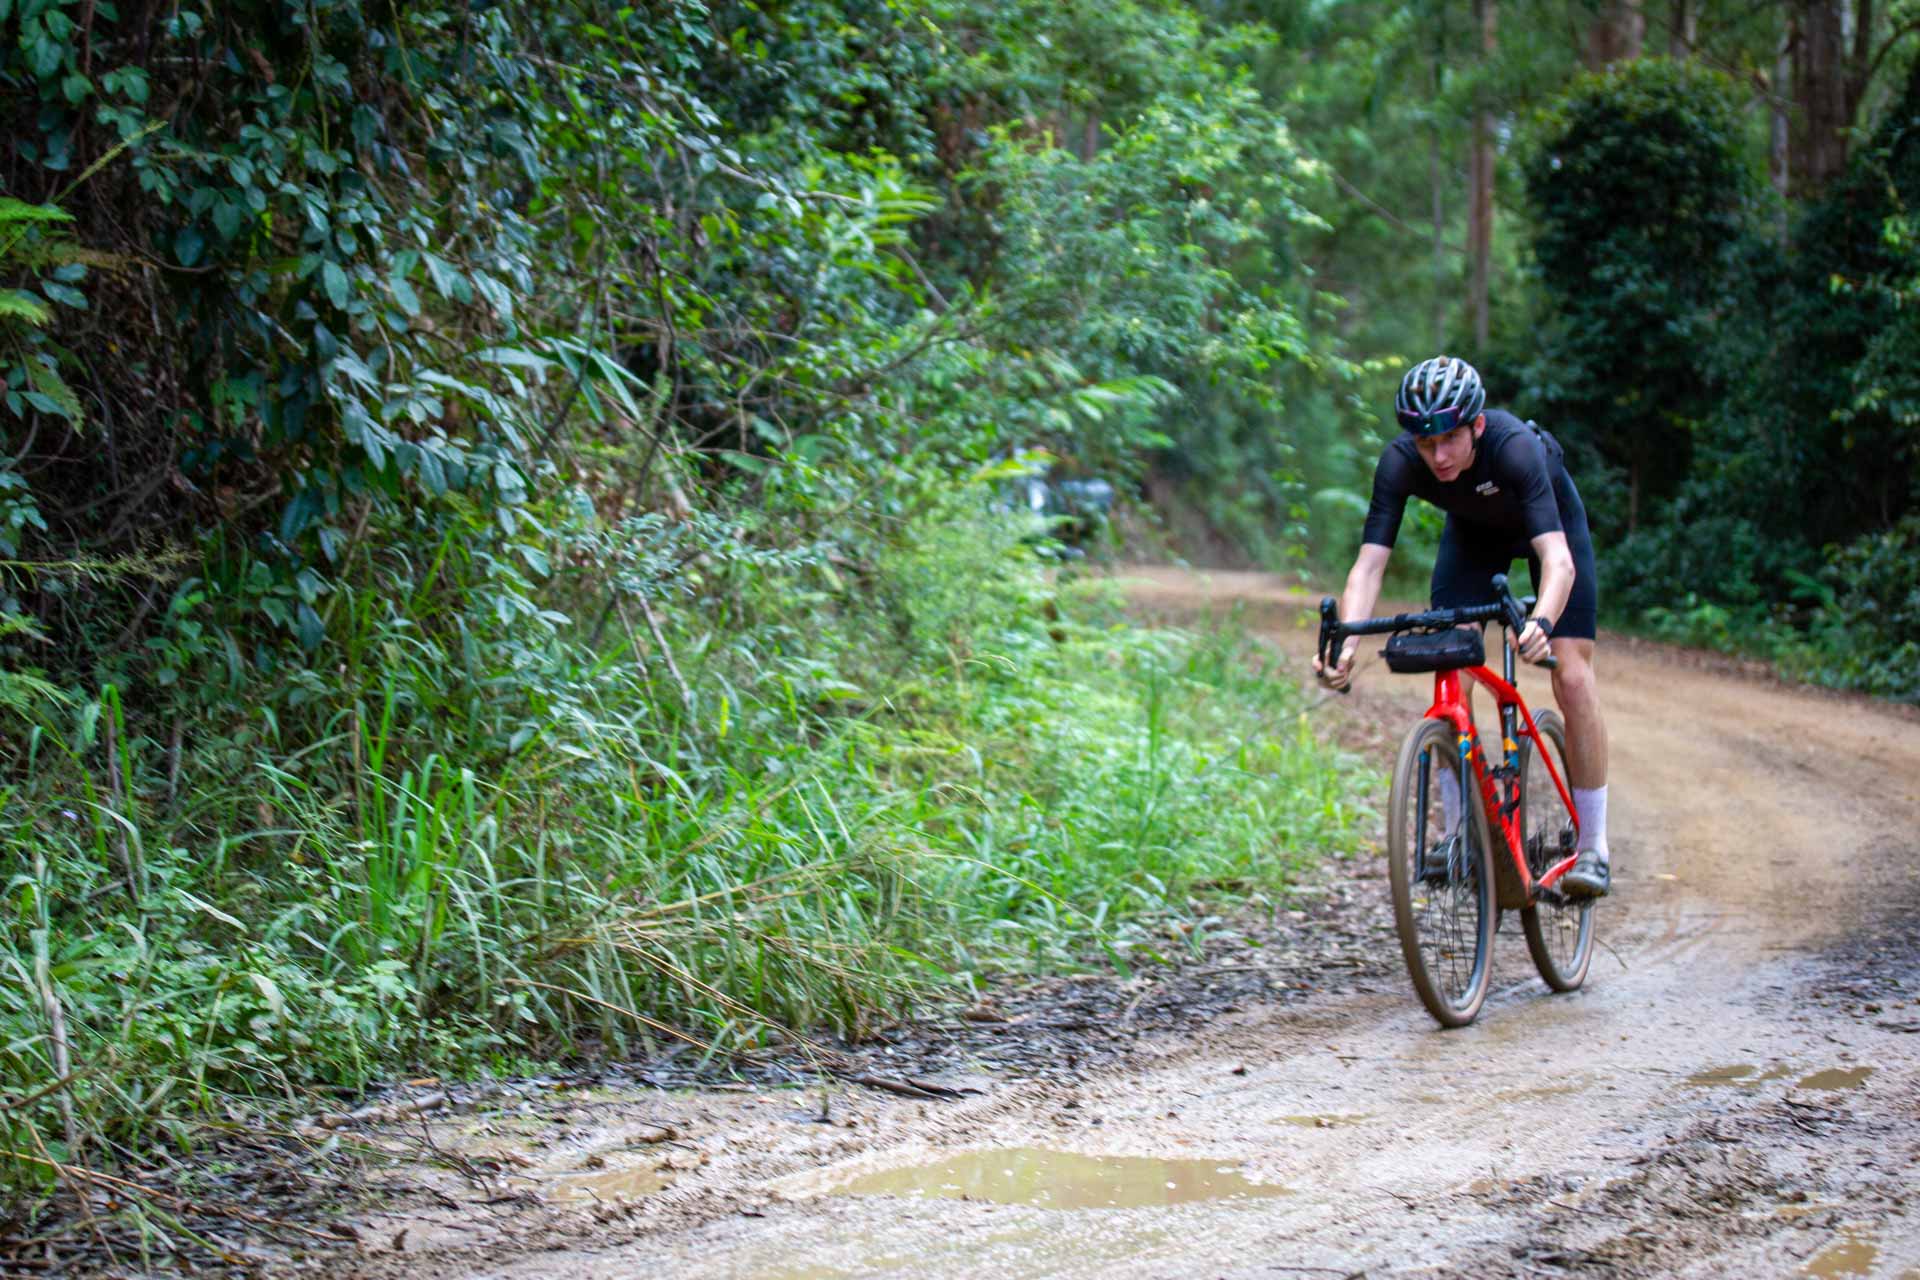 What the Heck Is a Gravel Bike?, Max Hobson, trek, person riding gravel bike, dirt road, muddy puddle